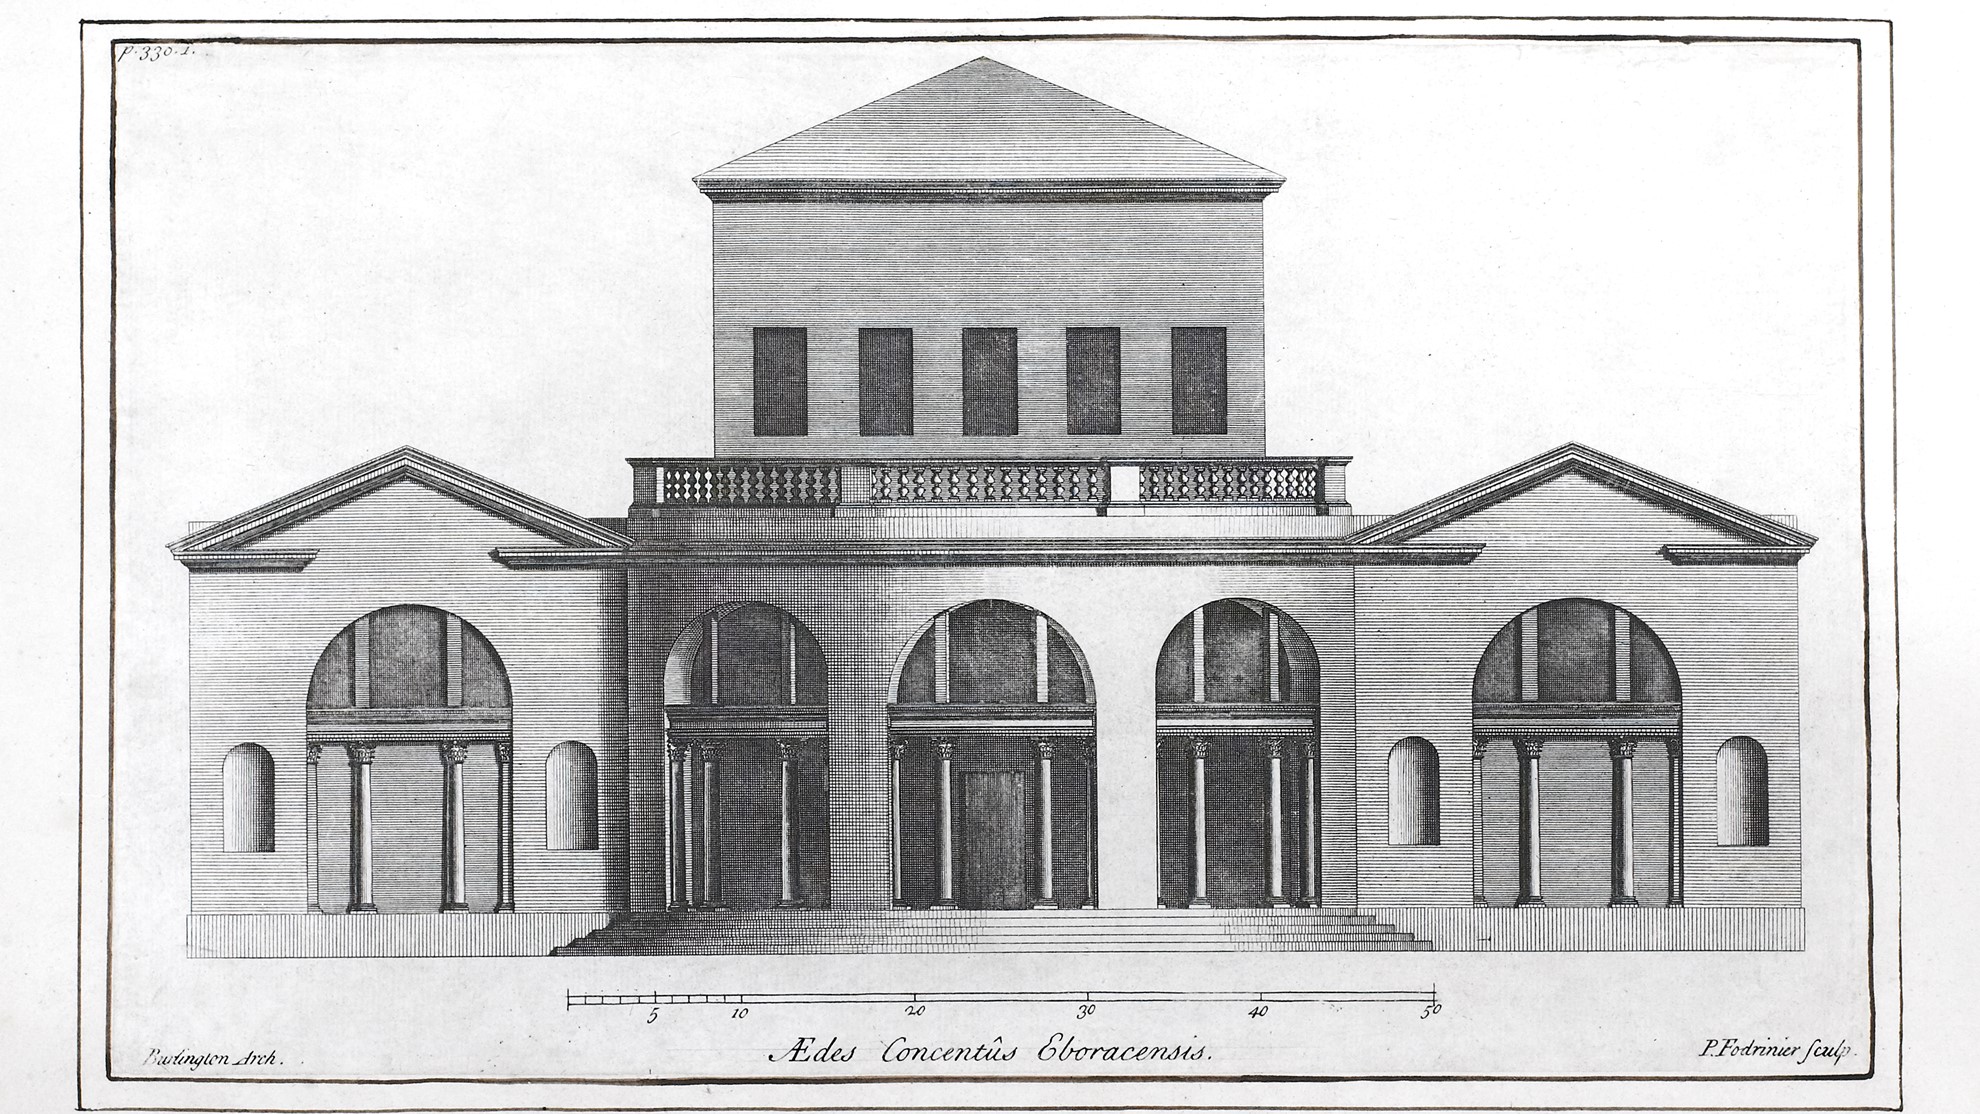 Lord Burlington's plans for exterior York Assembly Rooms | York Conservation Trust